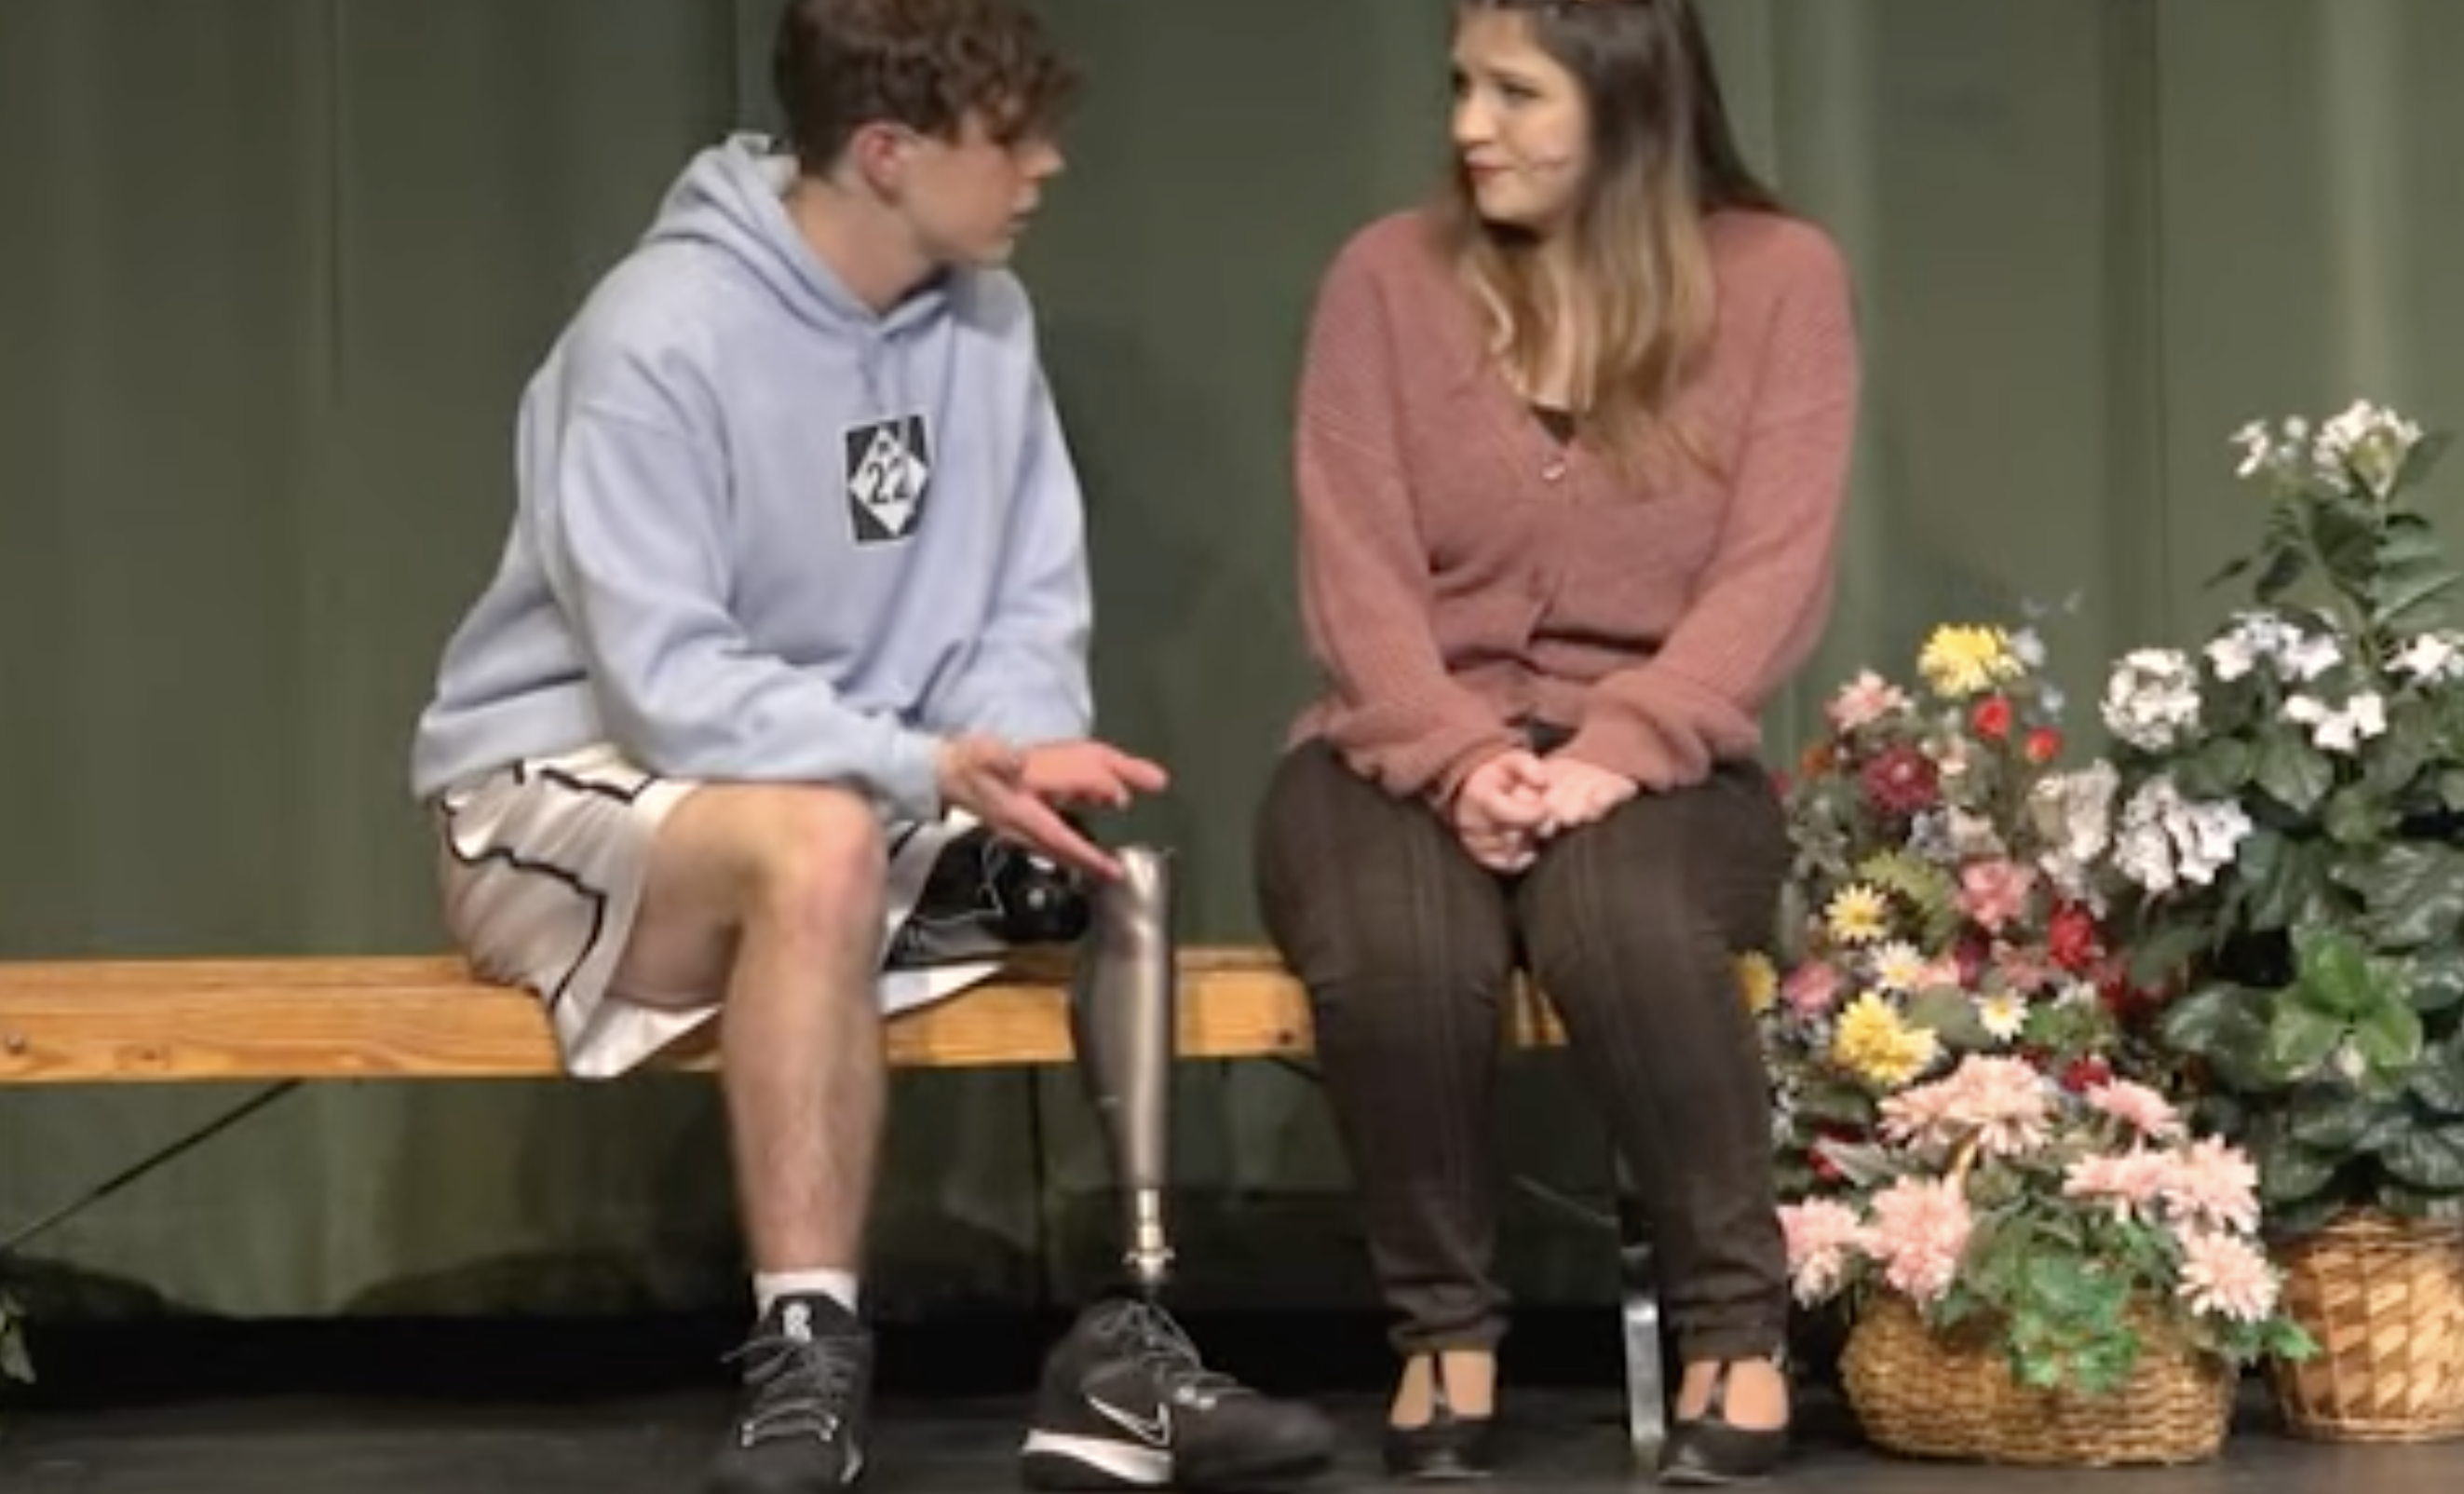 MacKale McGuire lost a leg after a battle with bone cancer, but persisted in playing sports. Most recently, he danced on stage in his high school’s first musical since the pandemic began. (March 8)